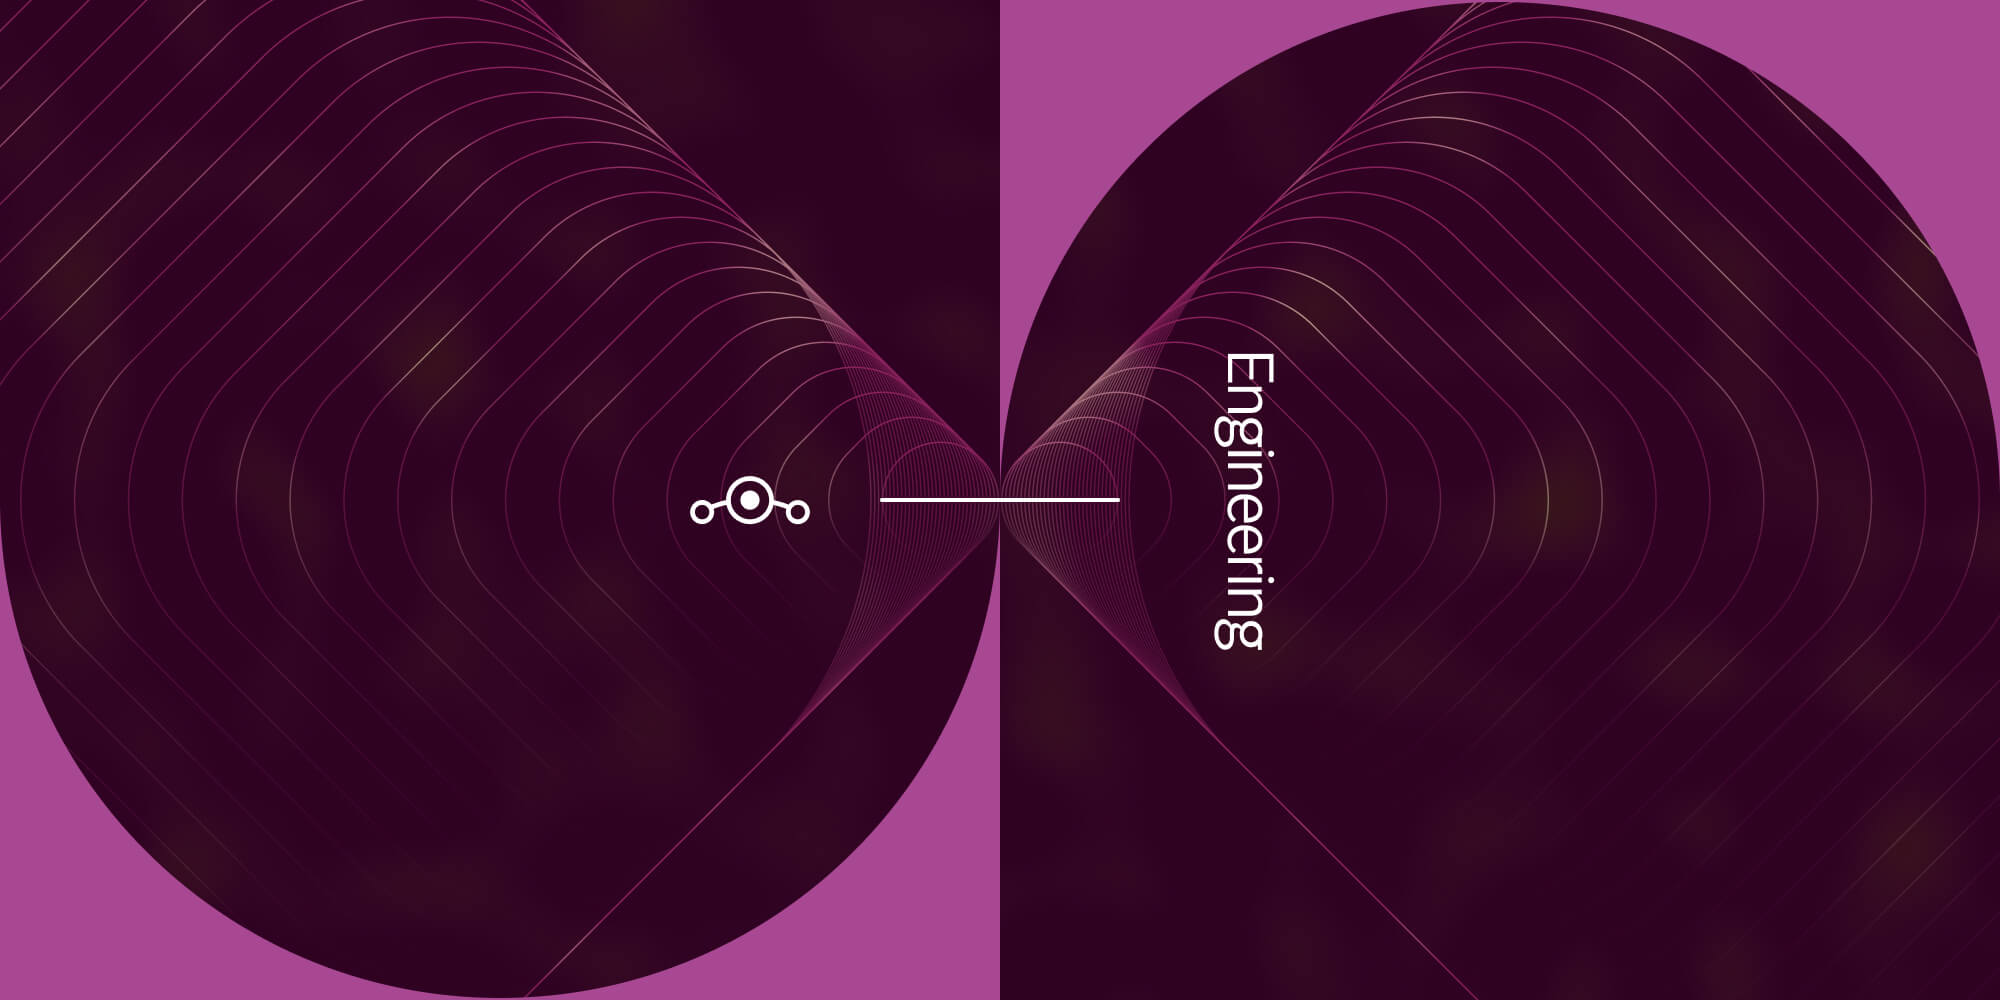 On a maroon background, warm repeating line shapes emanate from the center toward the left and right, transforming from circles to rectangles as they near the image's edge. Large pink shapes, the Lineage logo, and the word Engineering sit on top.